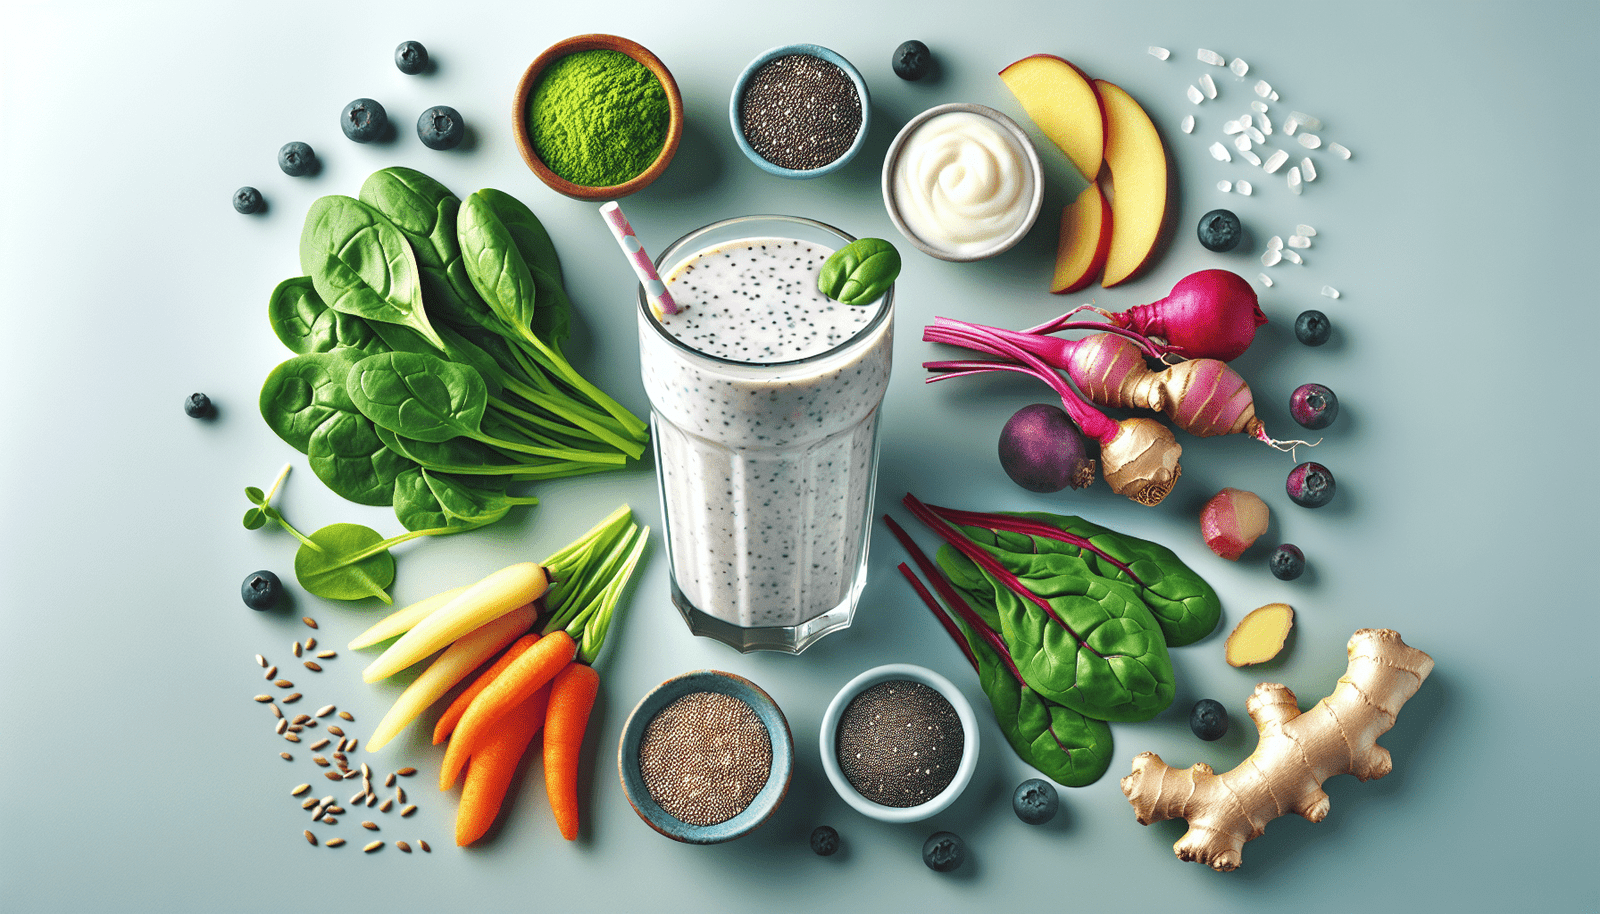 Supercharge Your Smoothie: 5 Nutrient-Packed Add-Ins For Peak Performance